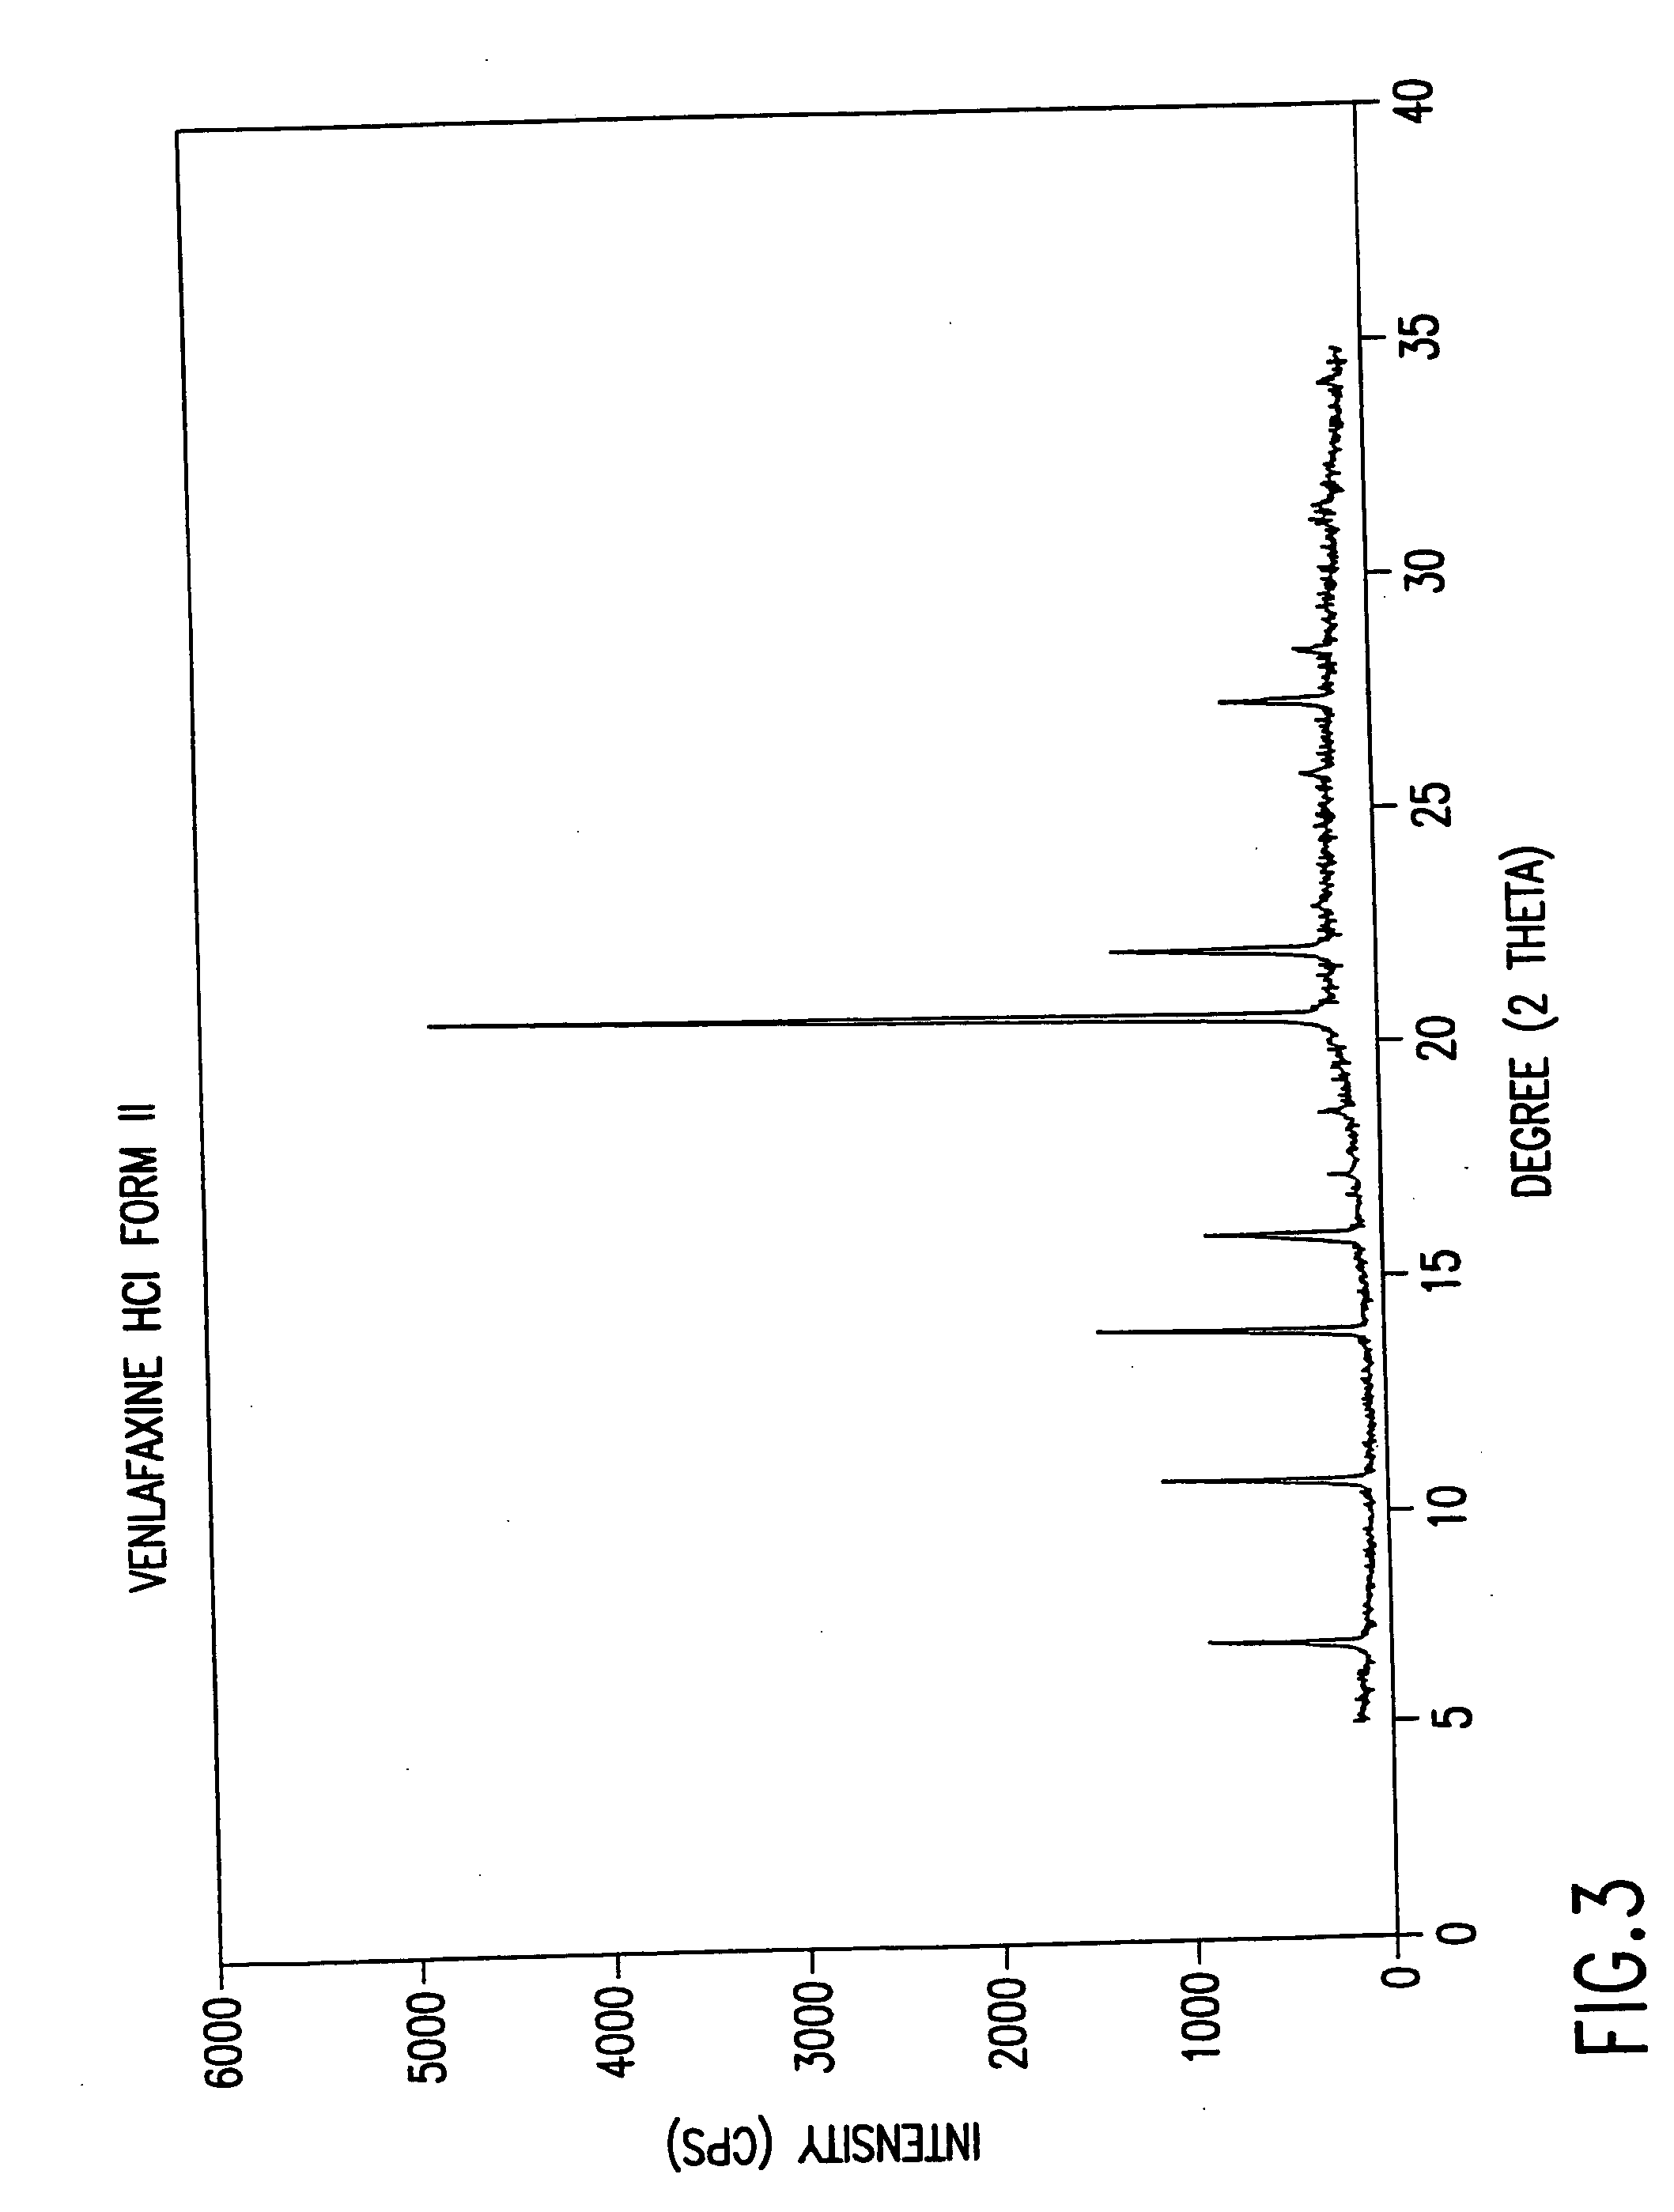 Novel crystalline polymorph of venlafaxine hydrochloride and methods for the preparation thereof